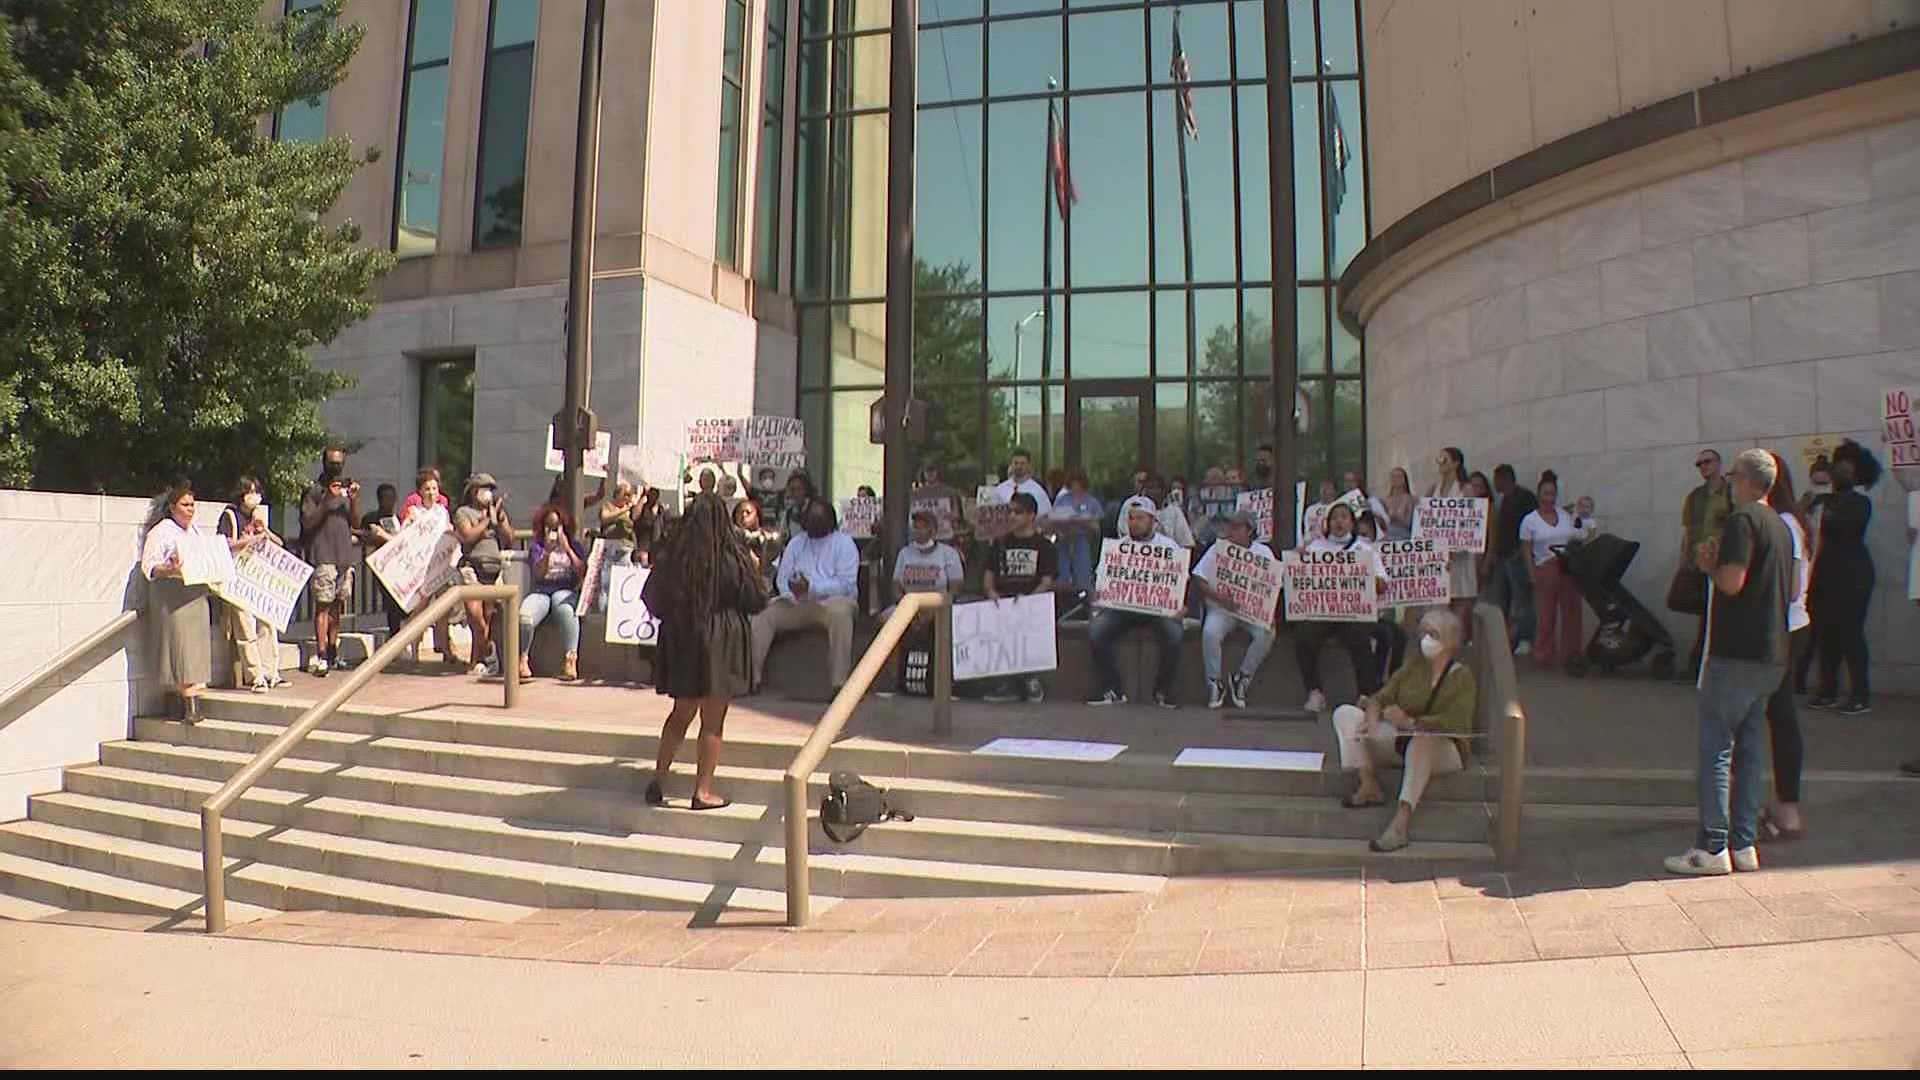 Protestors want to make sure their voices are heard concerning the Atlanta Detention Center.